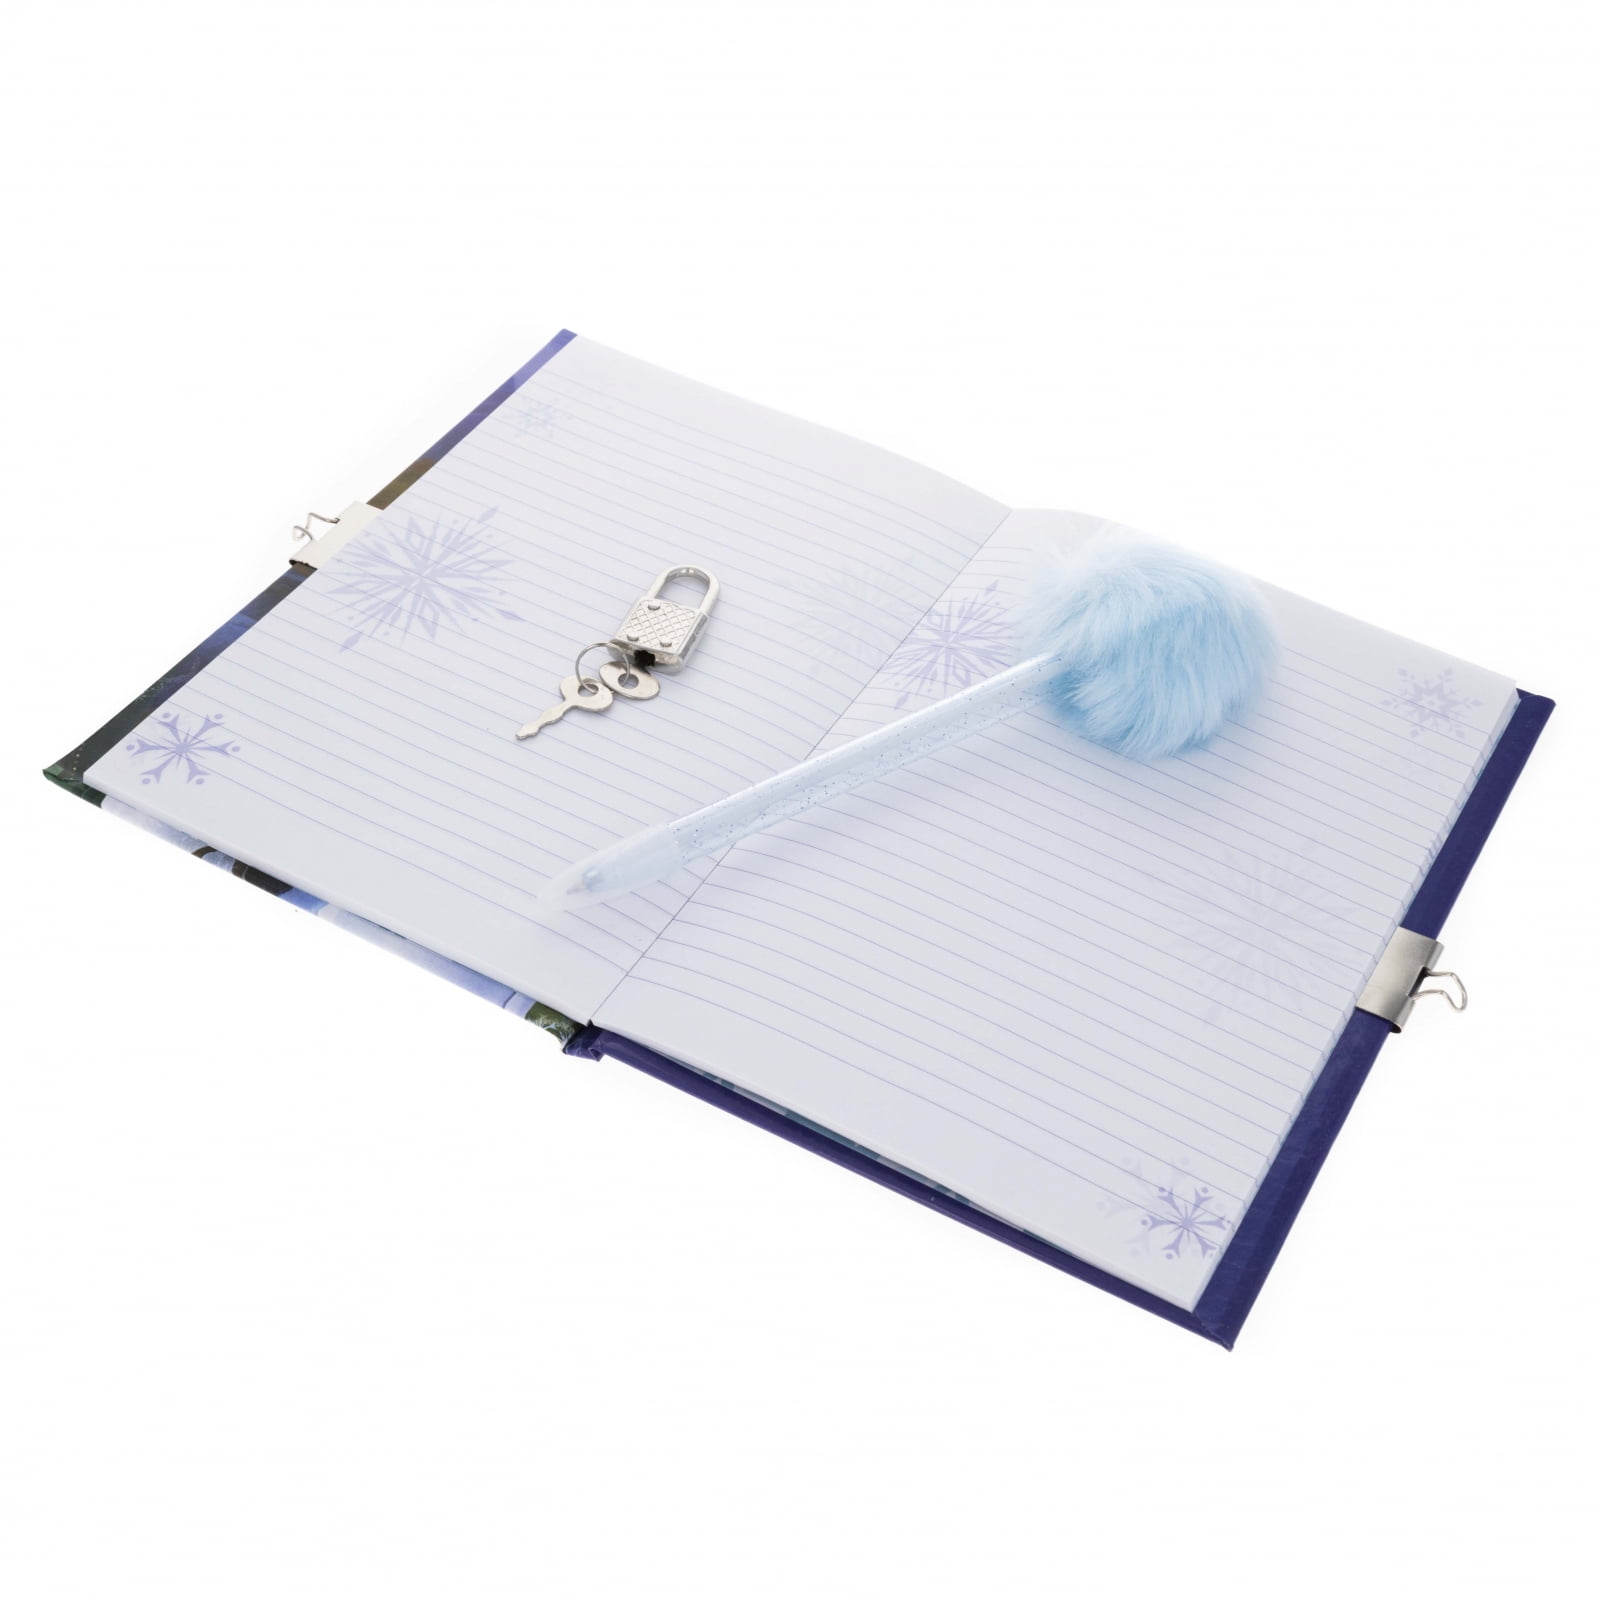 DIARY WITH MAGIC PEN FROZEN – Kids Licensing